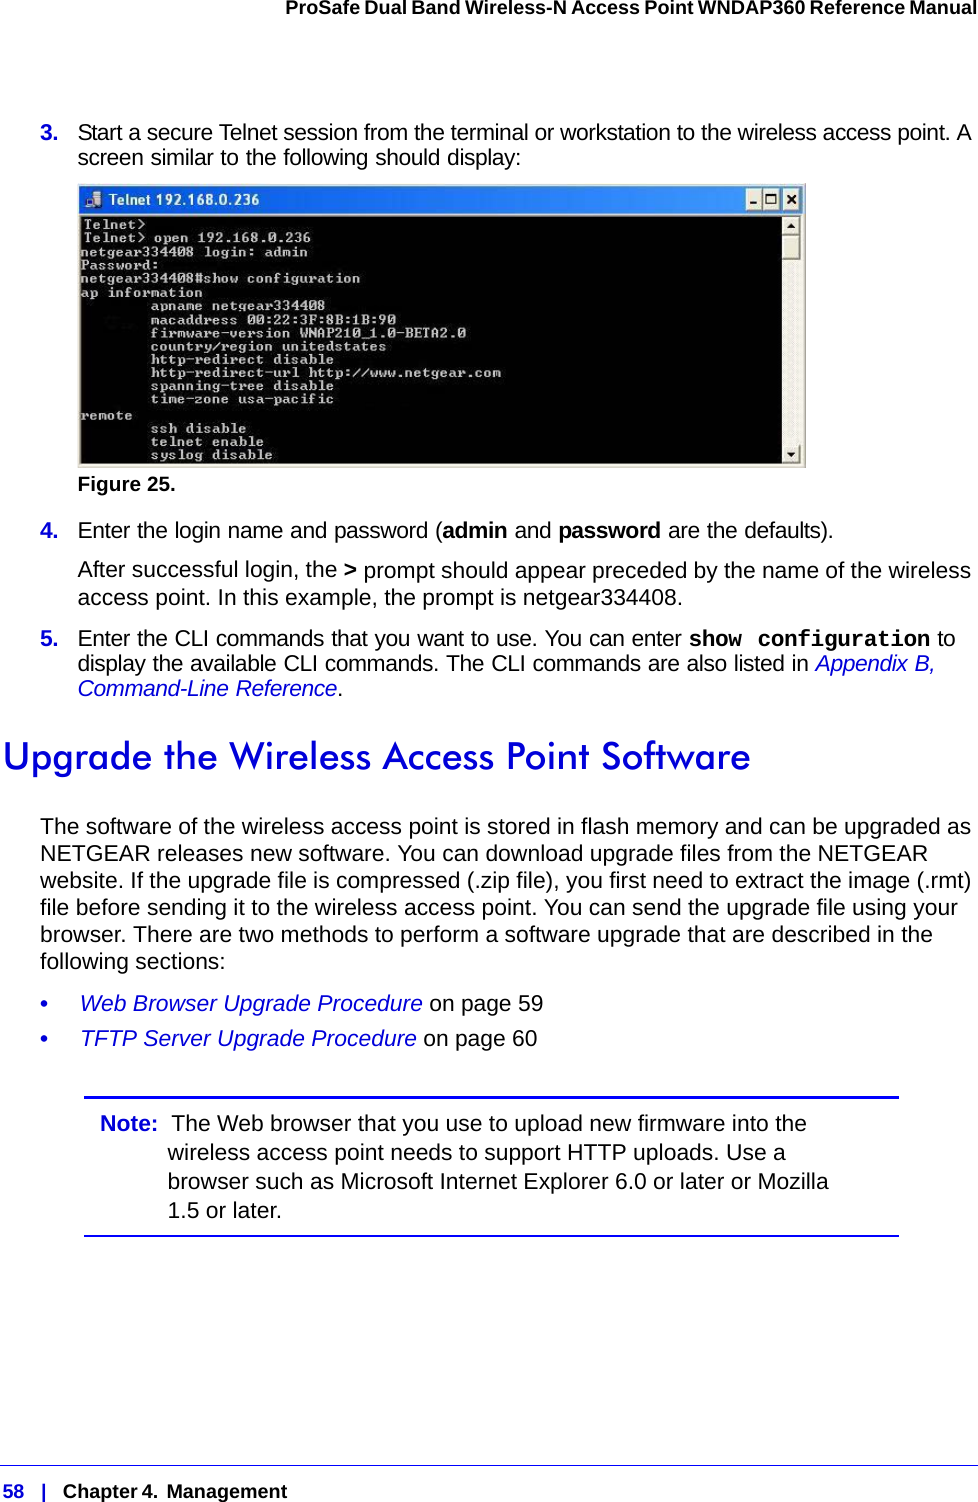 58   |   Chapter 4.  Management  ProSafe Dual Band Wireless-N Access Point WNDAP360 Reference Manual 3.  Start a secure Telnet session from the terminal or workstation to the wireless access point. A screen similar to the following should display:Figure 25.  4.  Enter the login name and password (admin and password are the defaults). After successful login, the &gt; prompt should appear preceded by the name of the wireless access point. In this example, the prompt is netgear334408. 5.  Enter the CLI commands that you want to use. You can enter show configuration to display the available CLI commands. The CLI commands are also listed in Appendix B, Command-Line Reference.Upgrade the Wireless Access Point Software The software of the wireless access point is stored in flash memory and can be upgraded as NETGEAR releases new software. You can download upgrade files from the NETGEAR website. If the upgrade file is compressed (.zip file), you first need to extract the image (.rmt) file before sending it to the wireless access point. You can send the upgrade file using your browser. There are two methods to perform a software upgrade that are described in the following sections:•     Web Browser Upgrade Procedure on page 59•     TFTP Server Upgrade Procedure on page 60Note:  The Web browser that you use to upload new firmware into the wireless access point needs to support HTTP uploads. Use a browser such as Microsoft Internet Explorer 6.0 or later or Mozilla 1.5 or later.